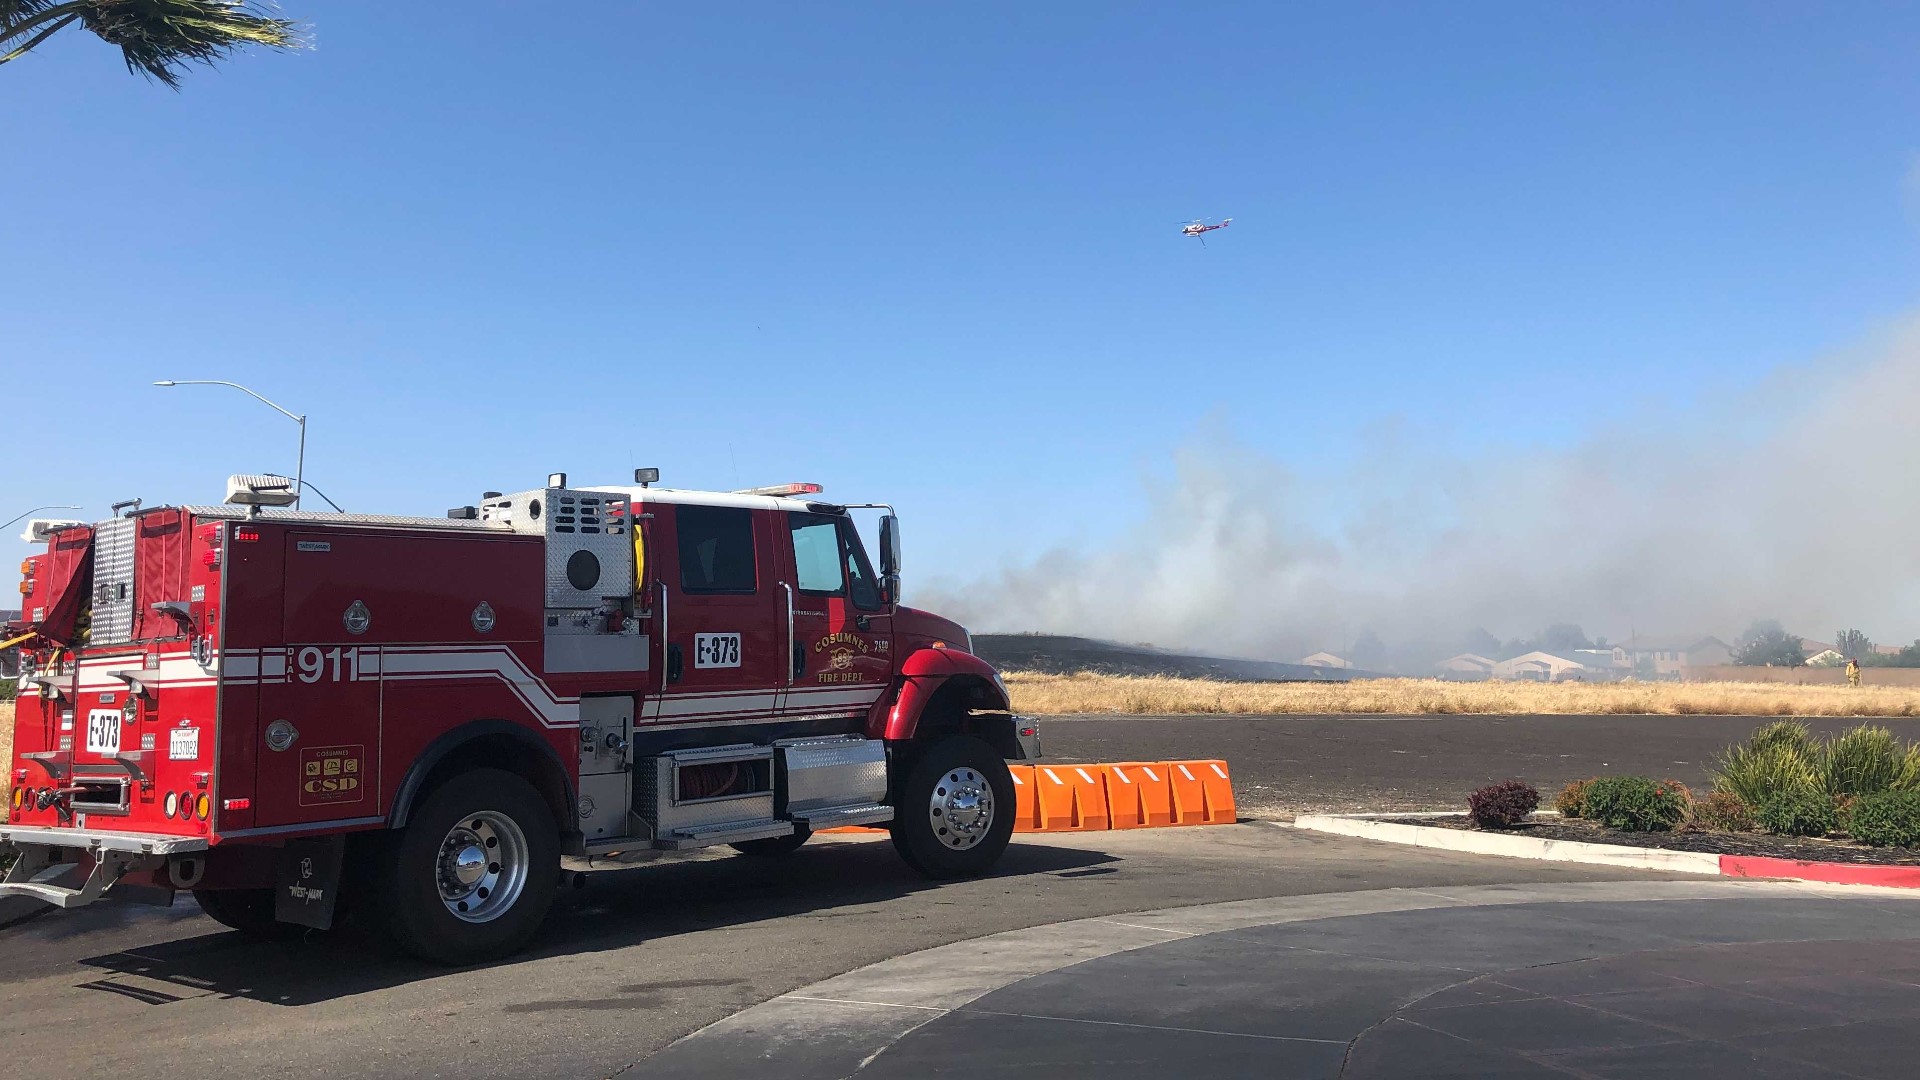 The fire is in the area of Sheldon Road and E. Stockton Boulevard, according to the Cosumnes Fire Department.